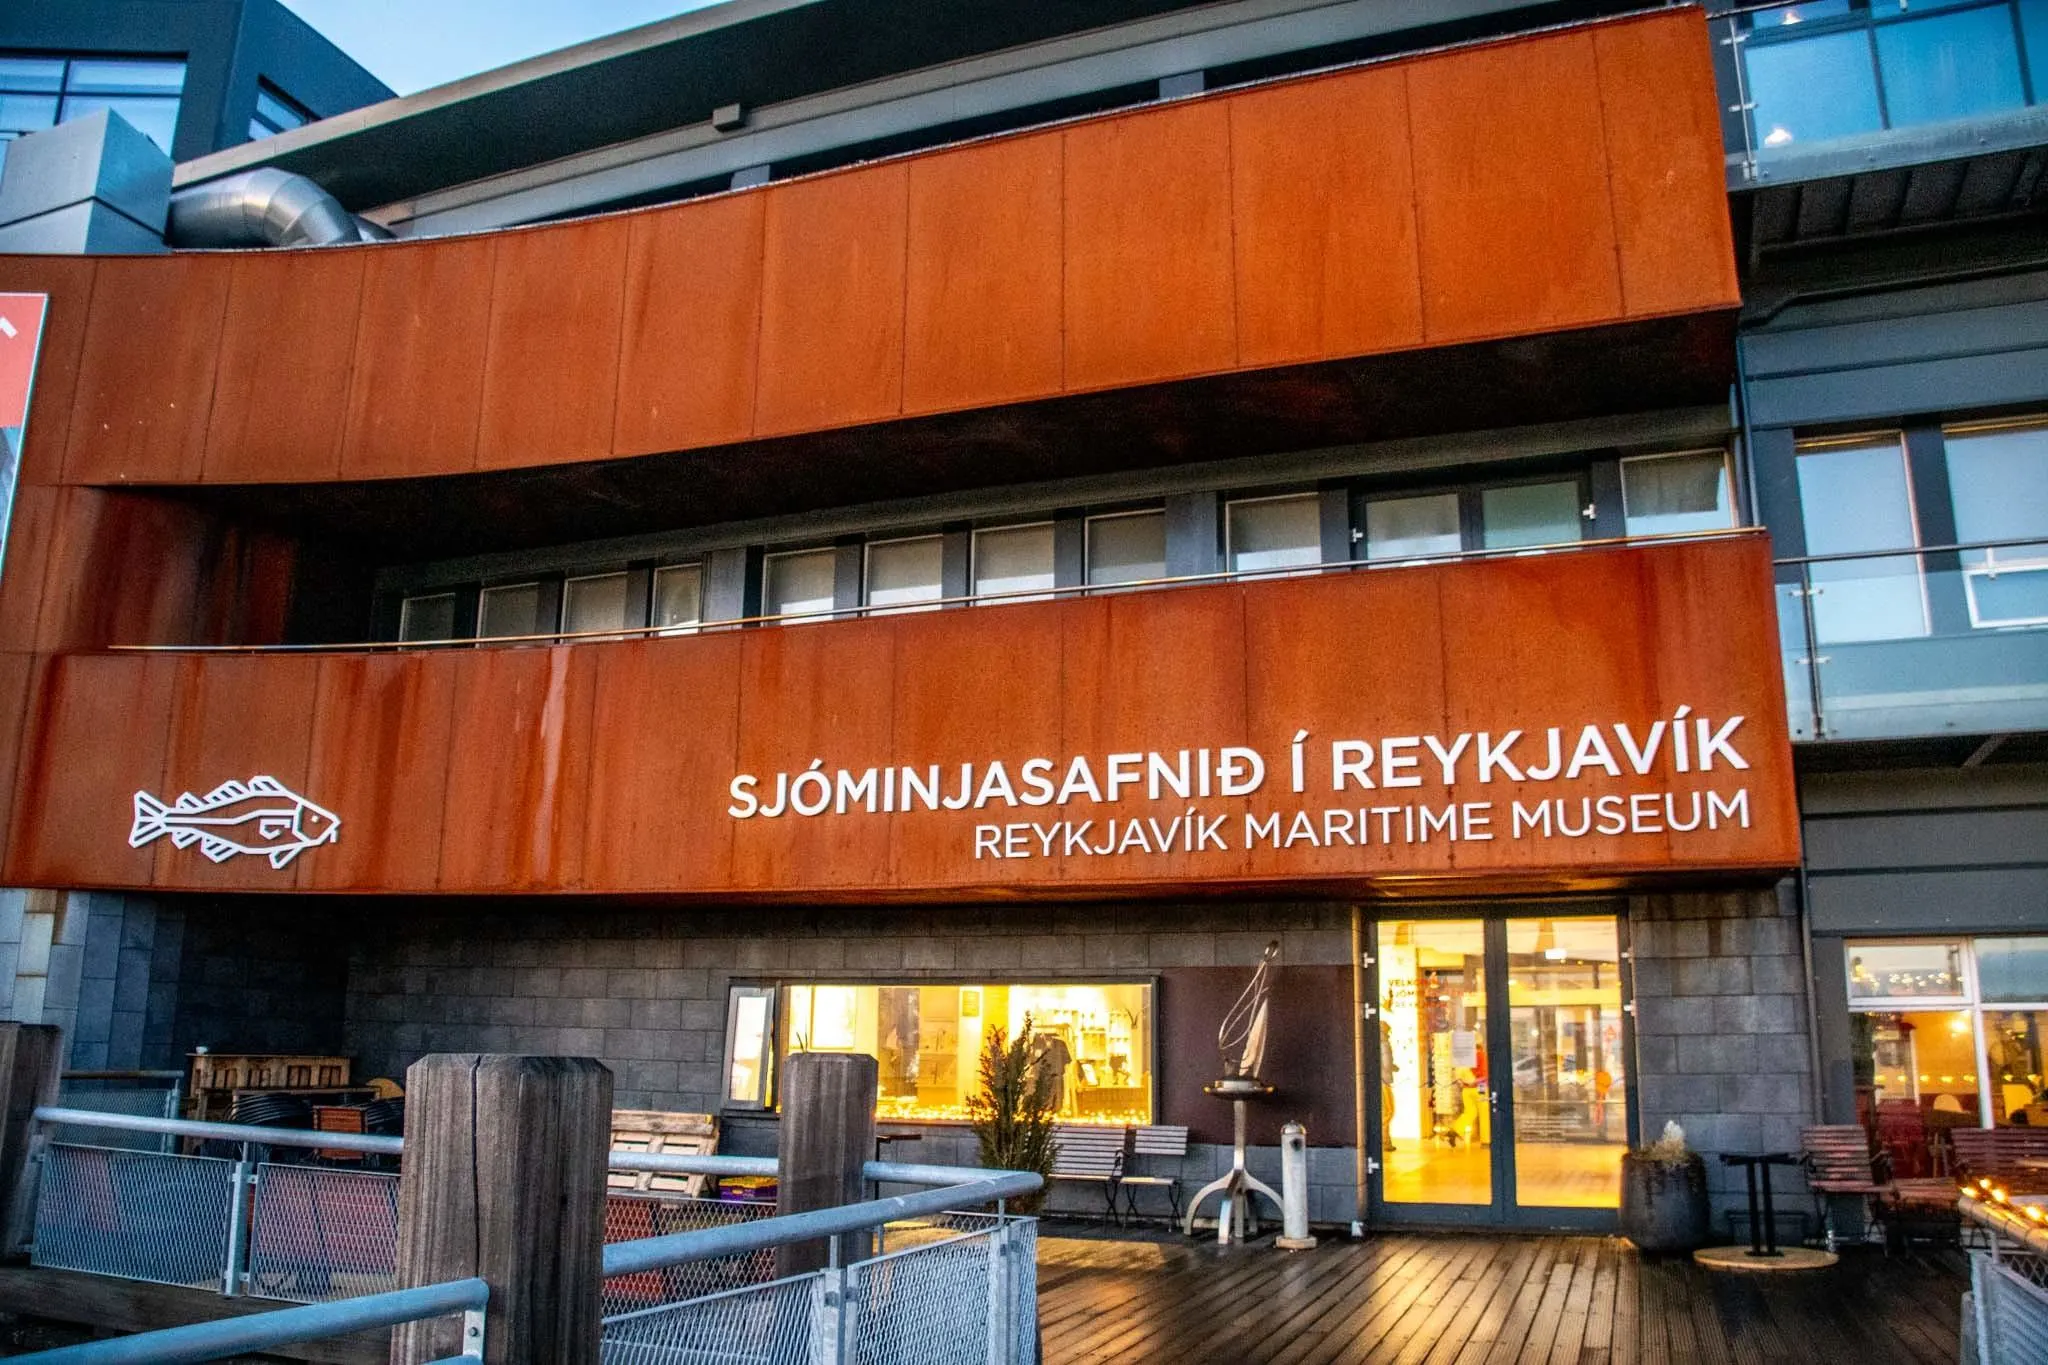 Exterior of a building with a sign for "Reykjavik Maritime Museum" 